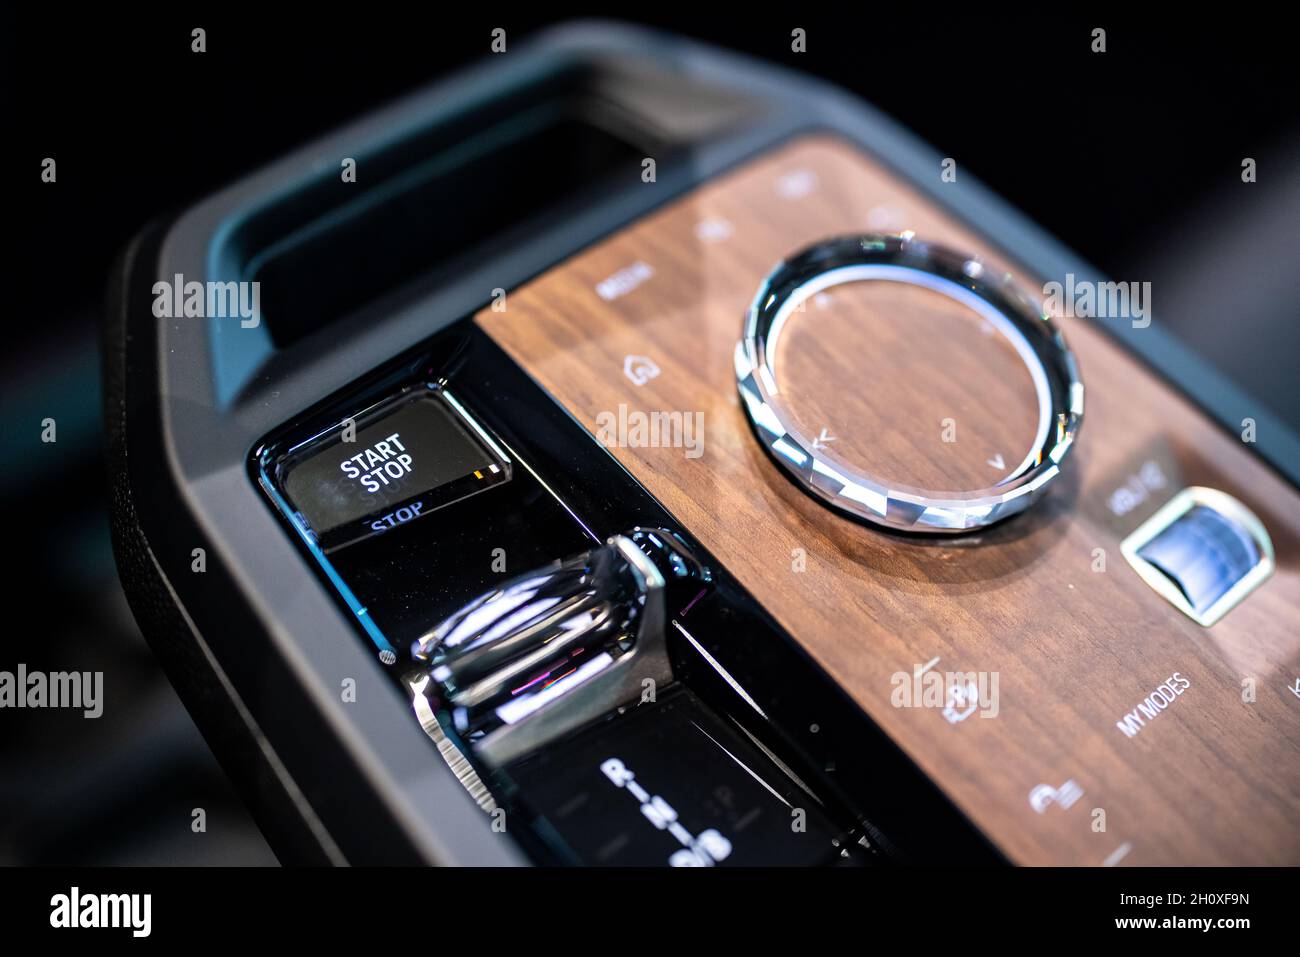 Garching, Germany. 29th Sep, 2021. The iDrive controller for controlling the various infotainment systems, as well as the paddle shifter, are seen on the center console inside a BMW iX during a BMW press event. Credit: Matthias Balk/dpa/Alamy Live News Stock Photo